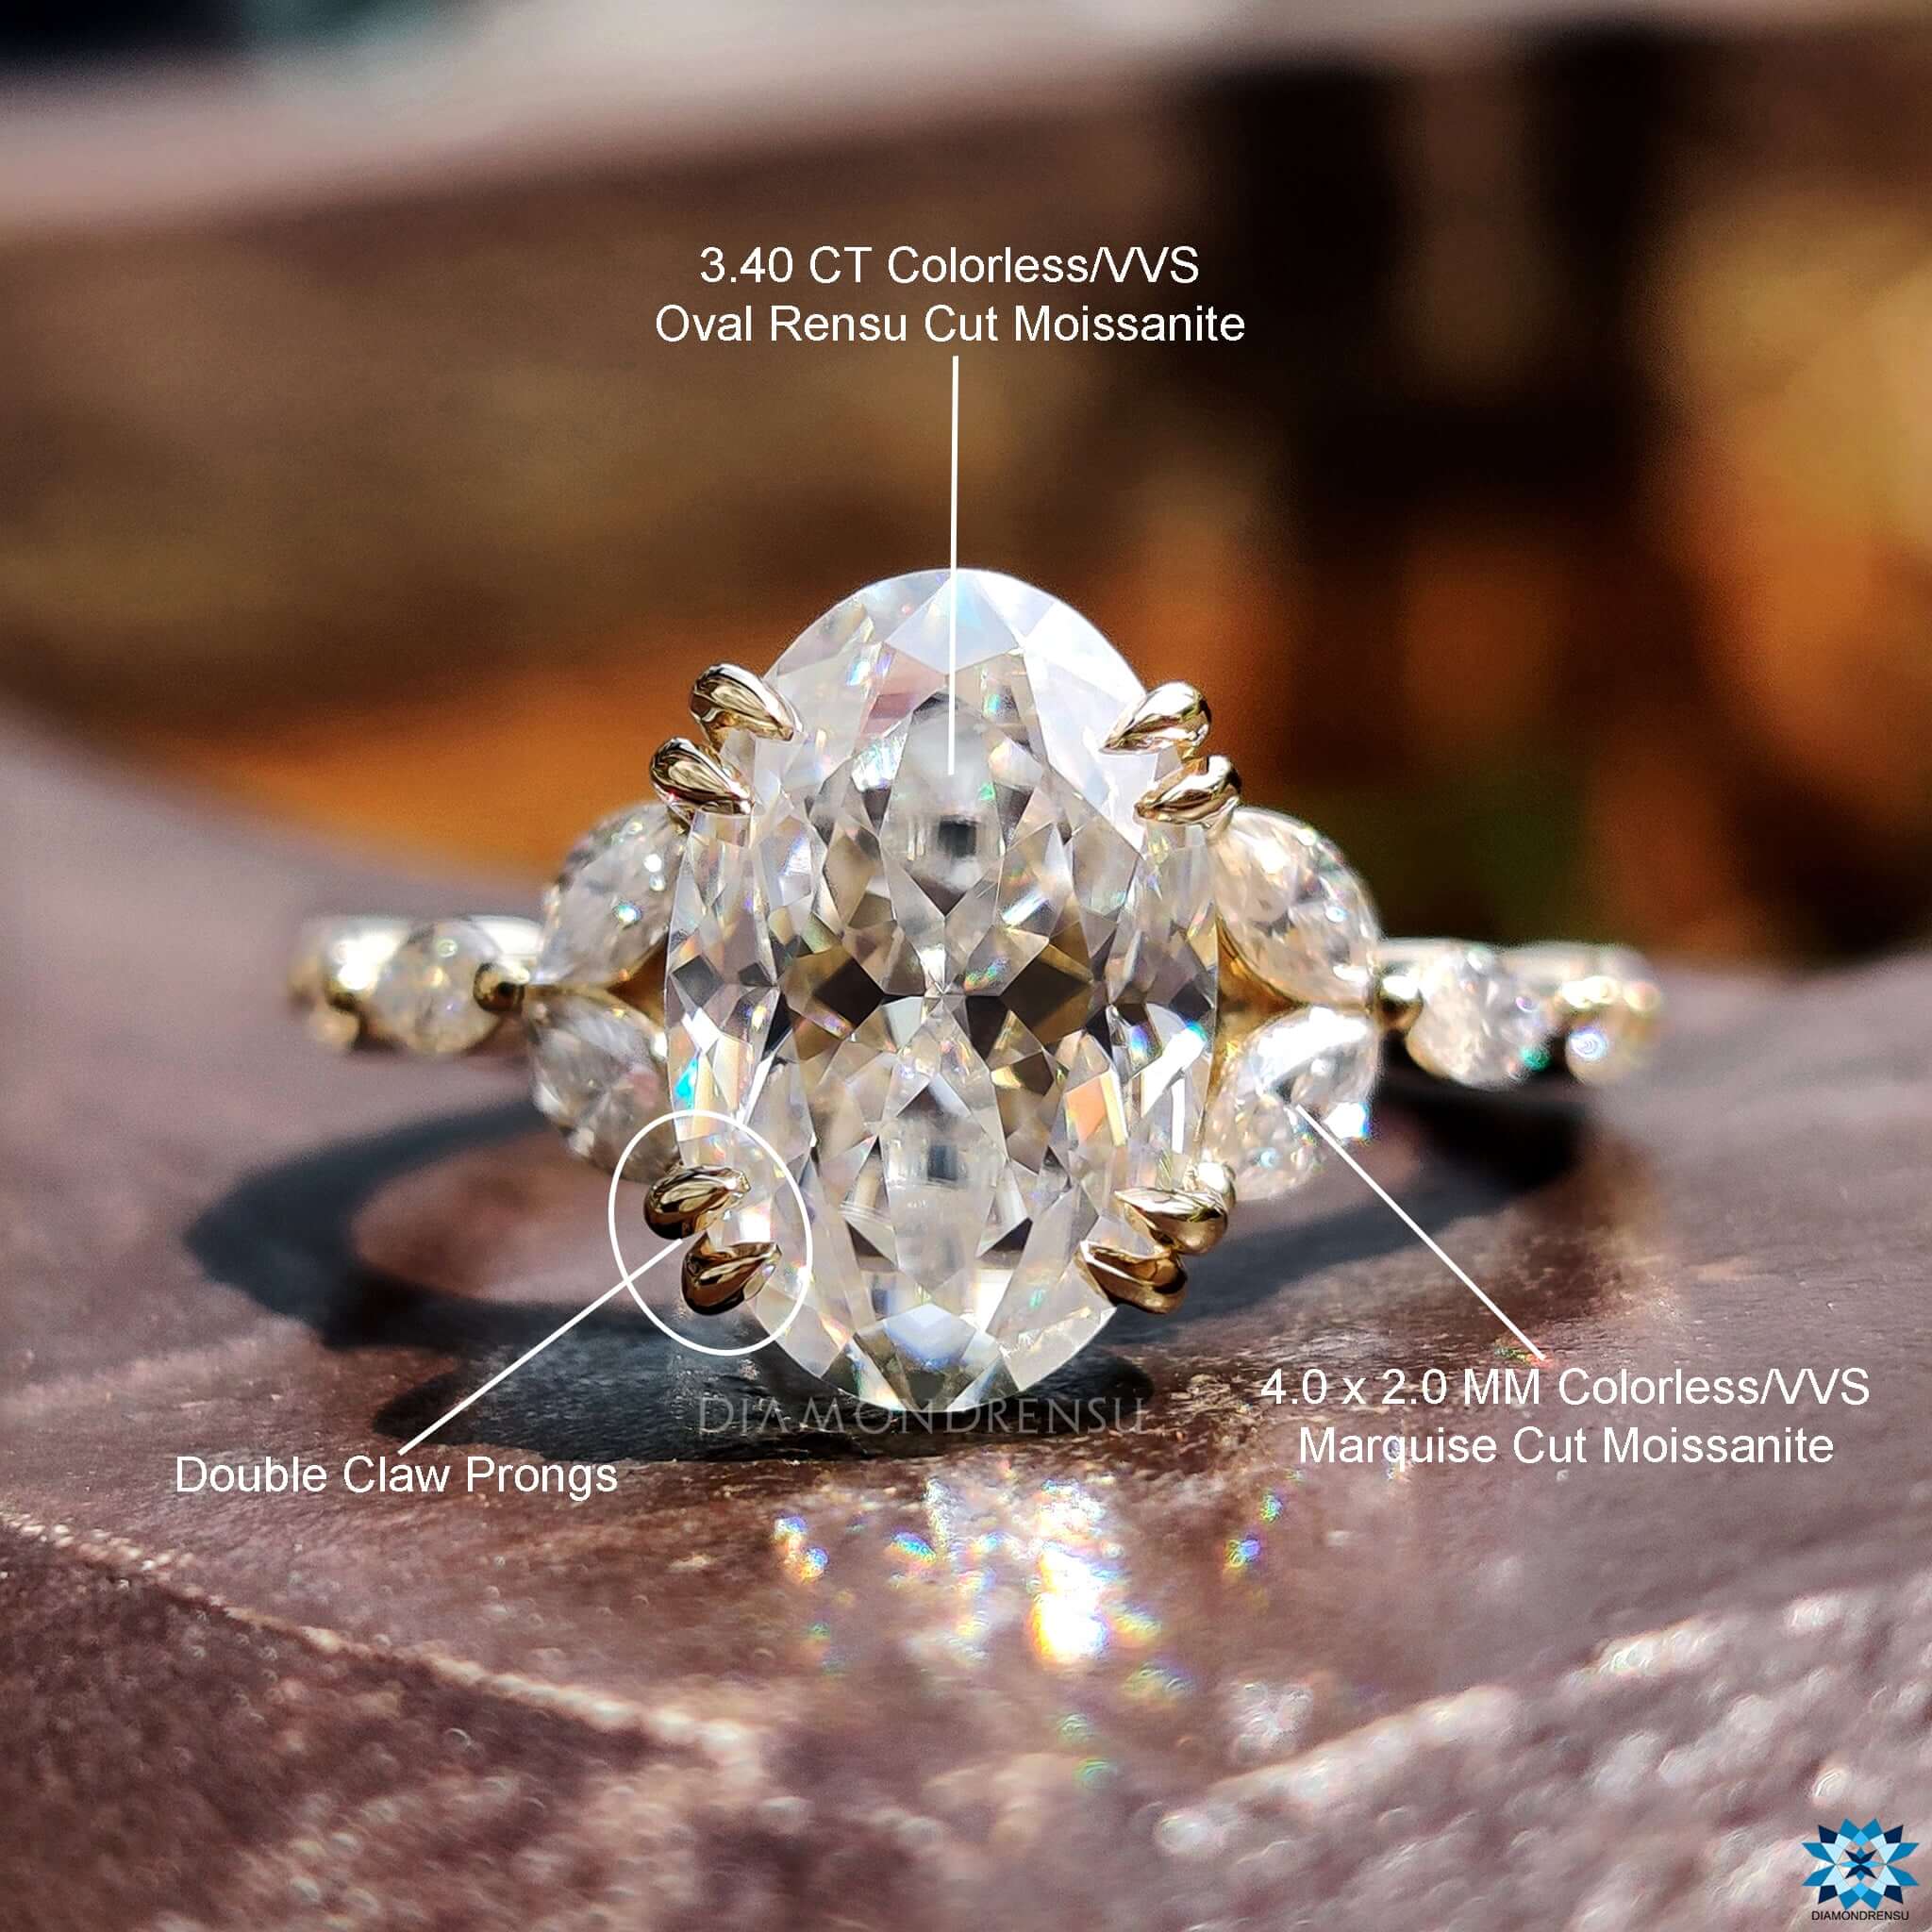 Radiant marquise moissanite gemstone, perfect for any occasion